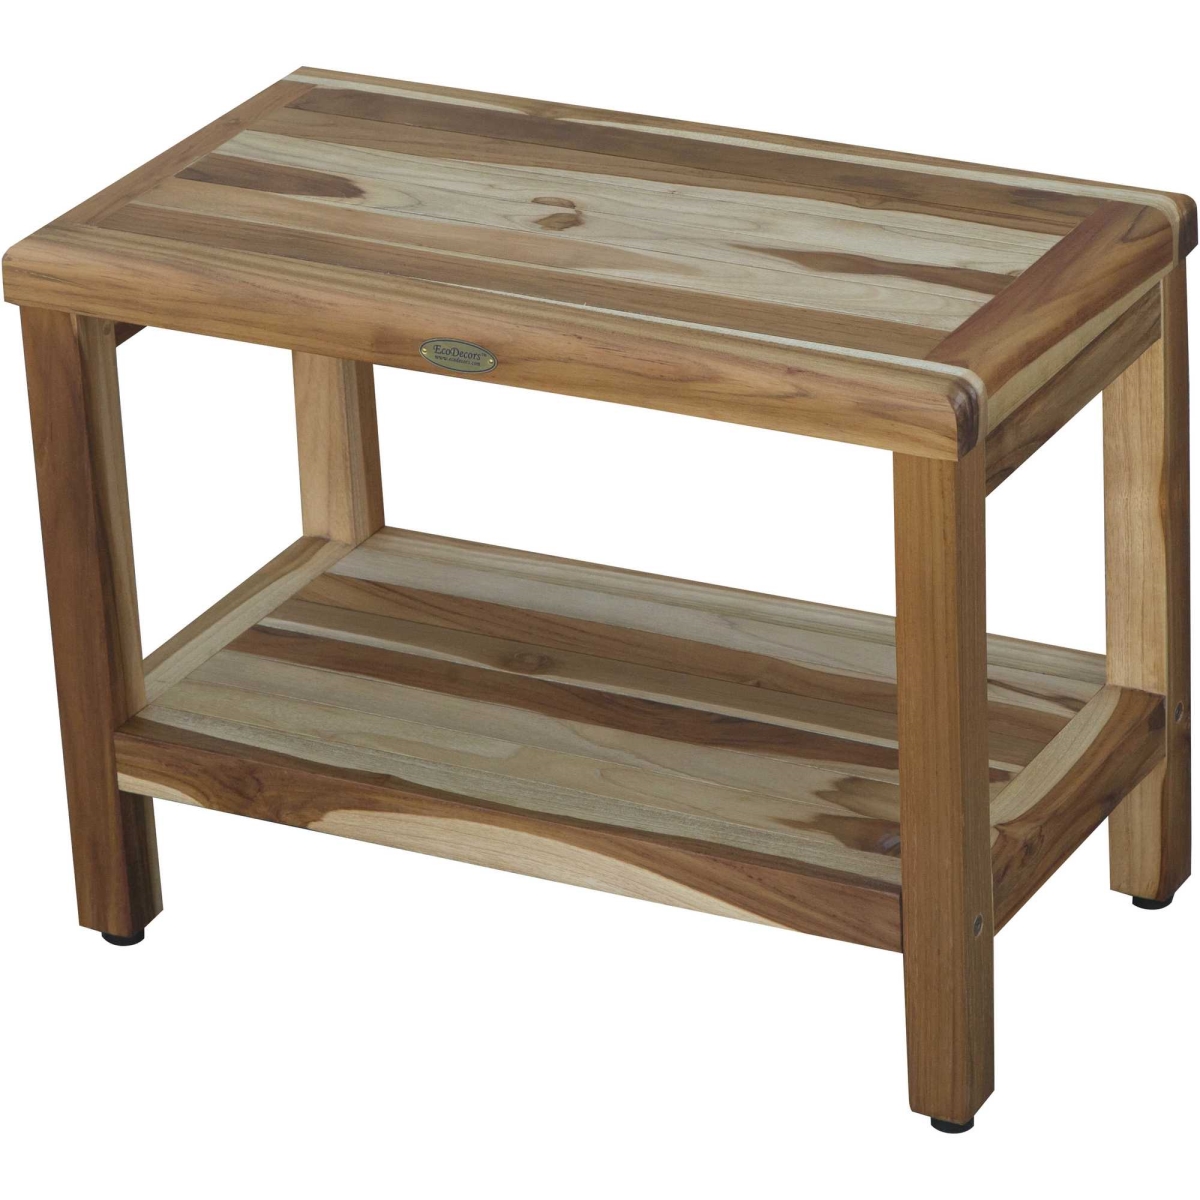 Picture of HomeRoots 376699 Rectangular Teak Shower Bench with Shelf in Natural Finish